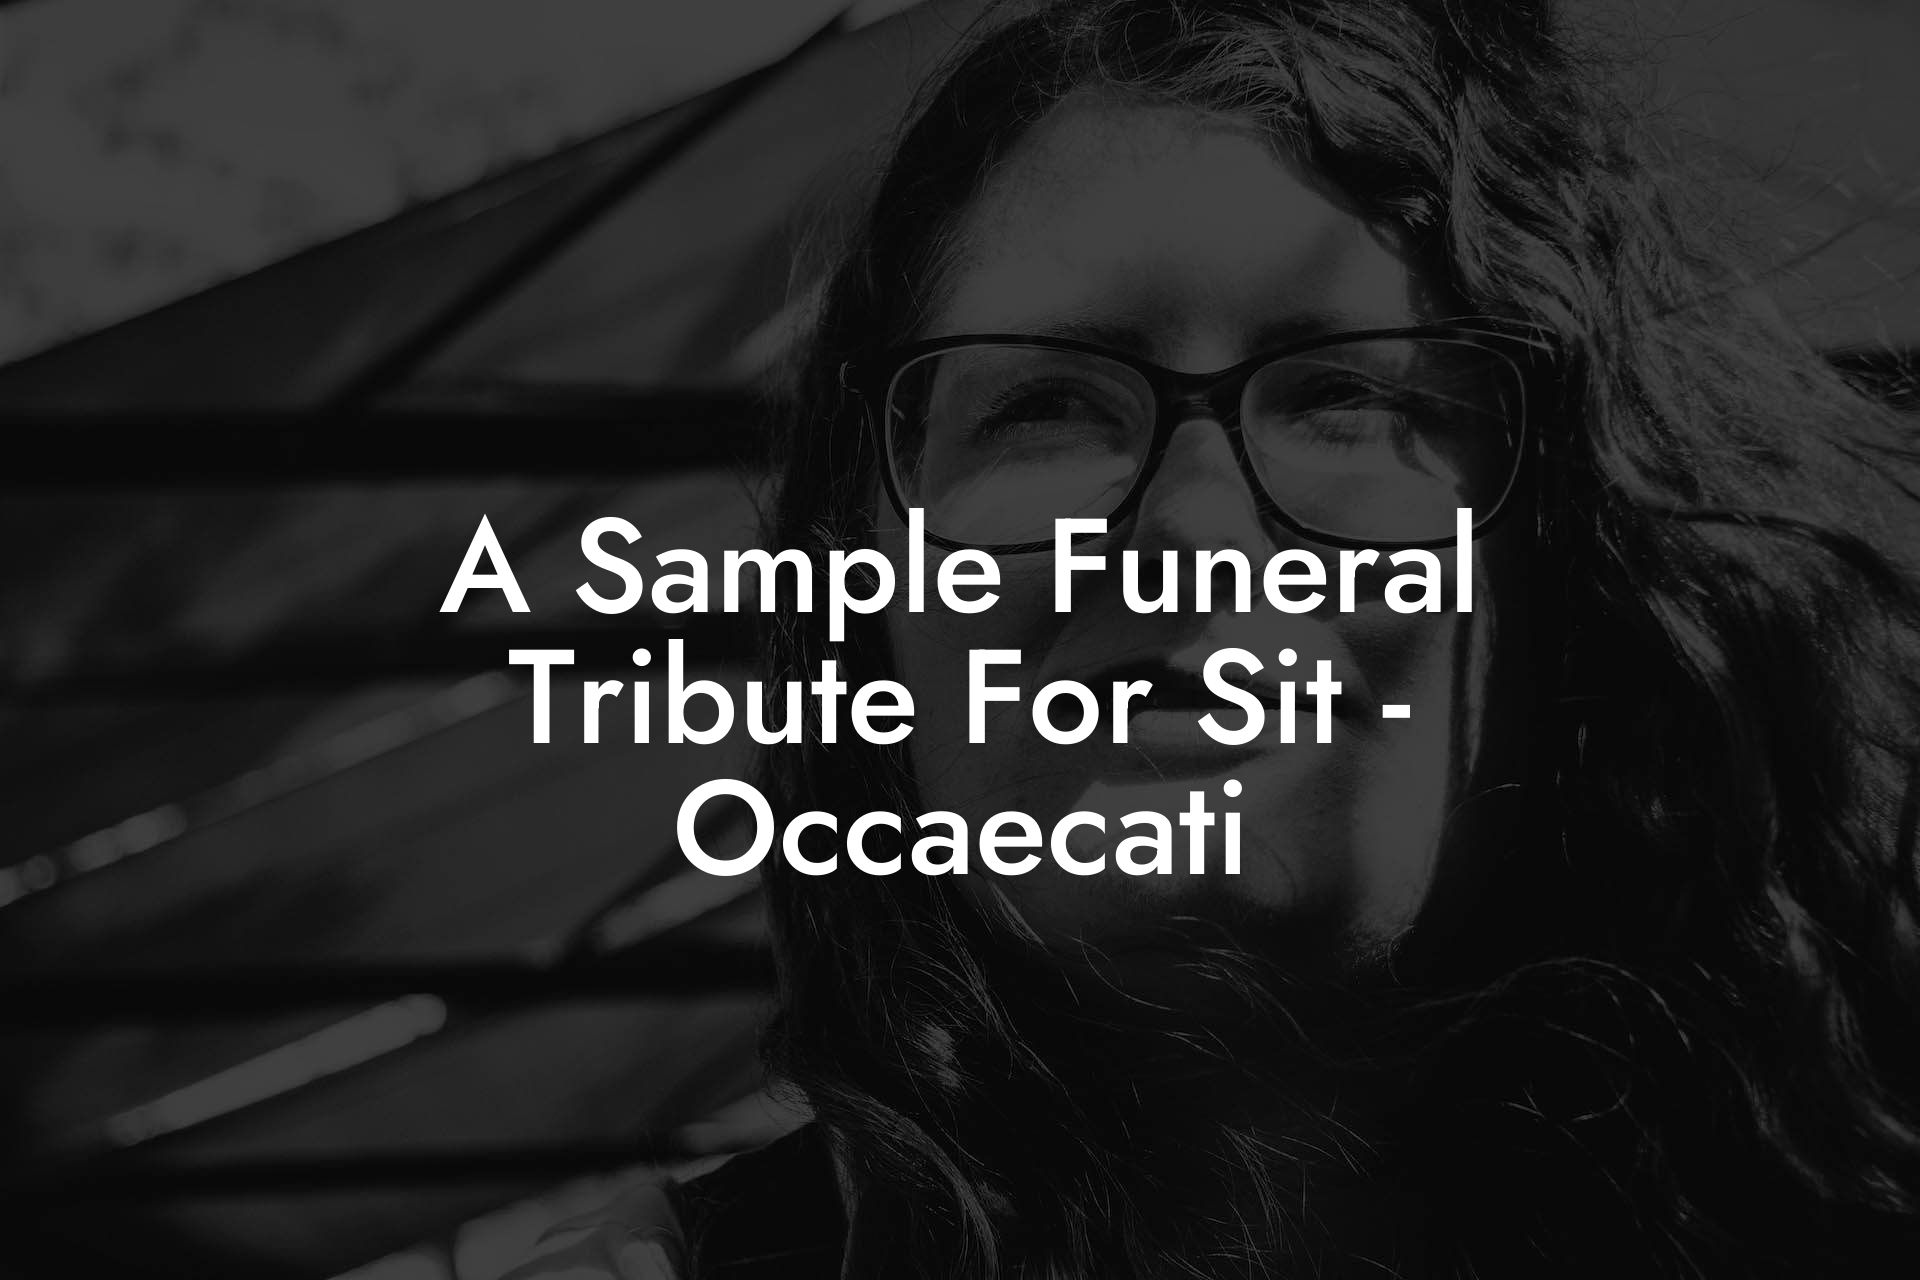 A Sample Funeral Tribute For Sit - Occaecati